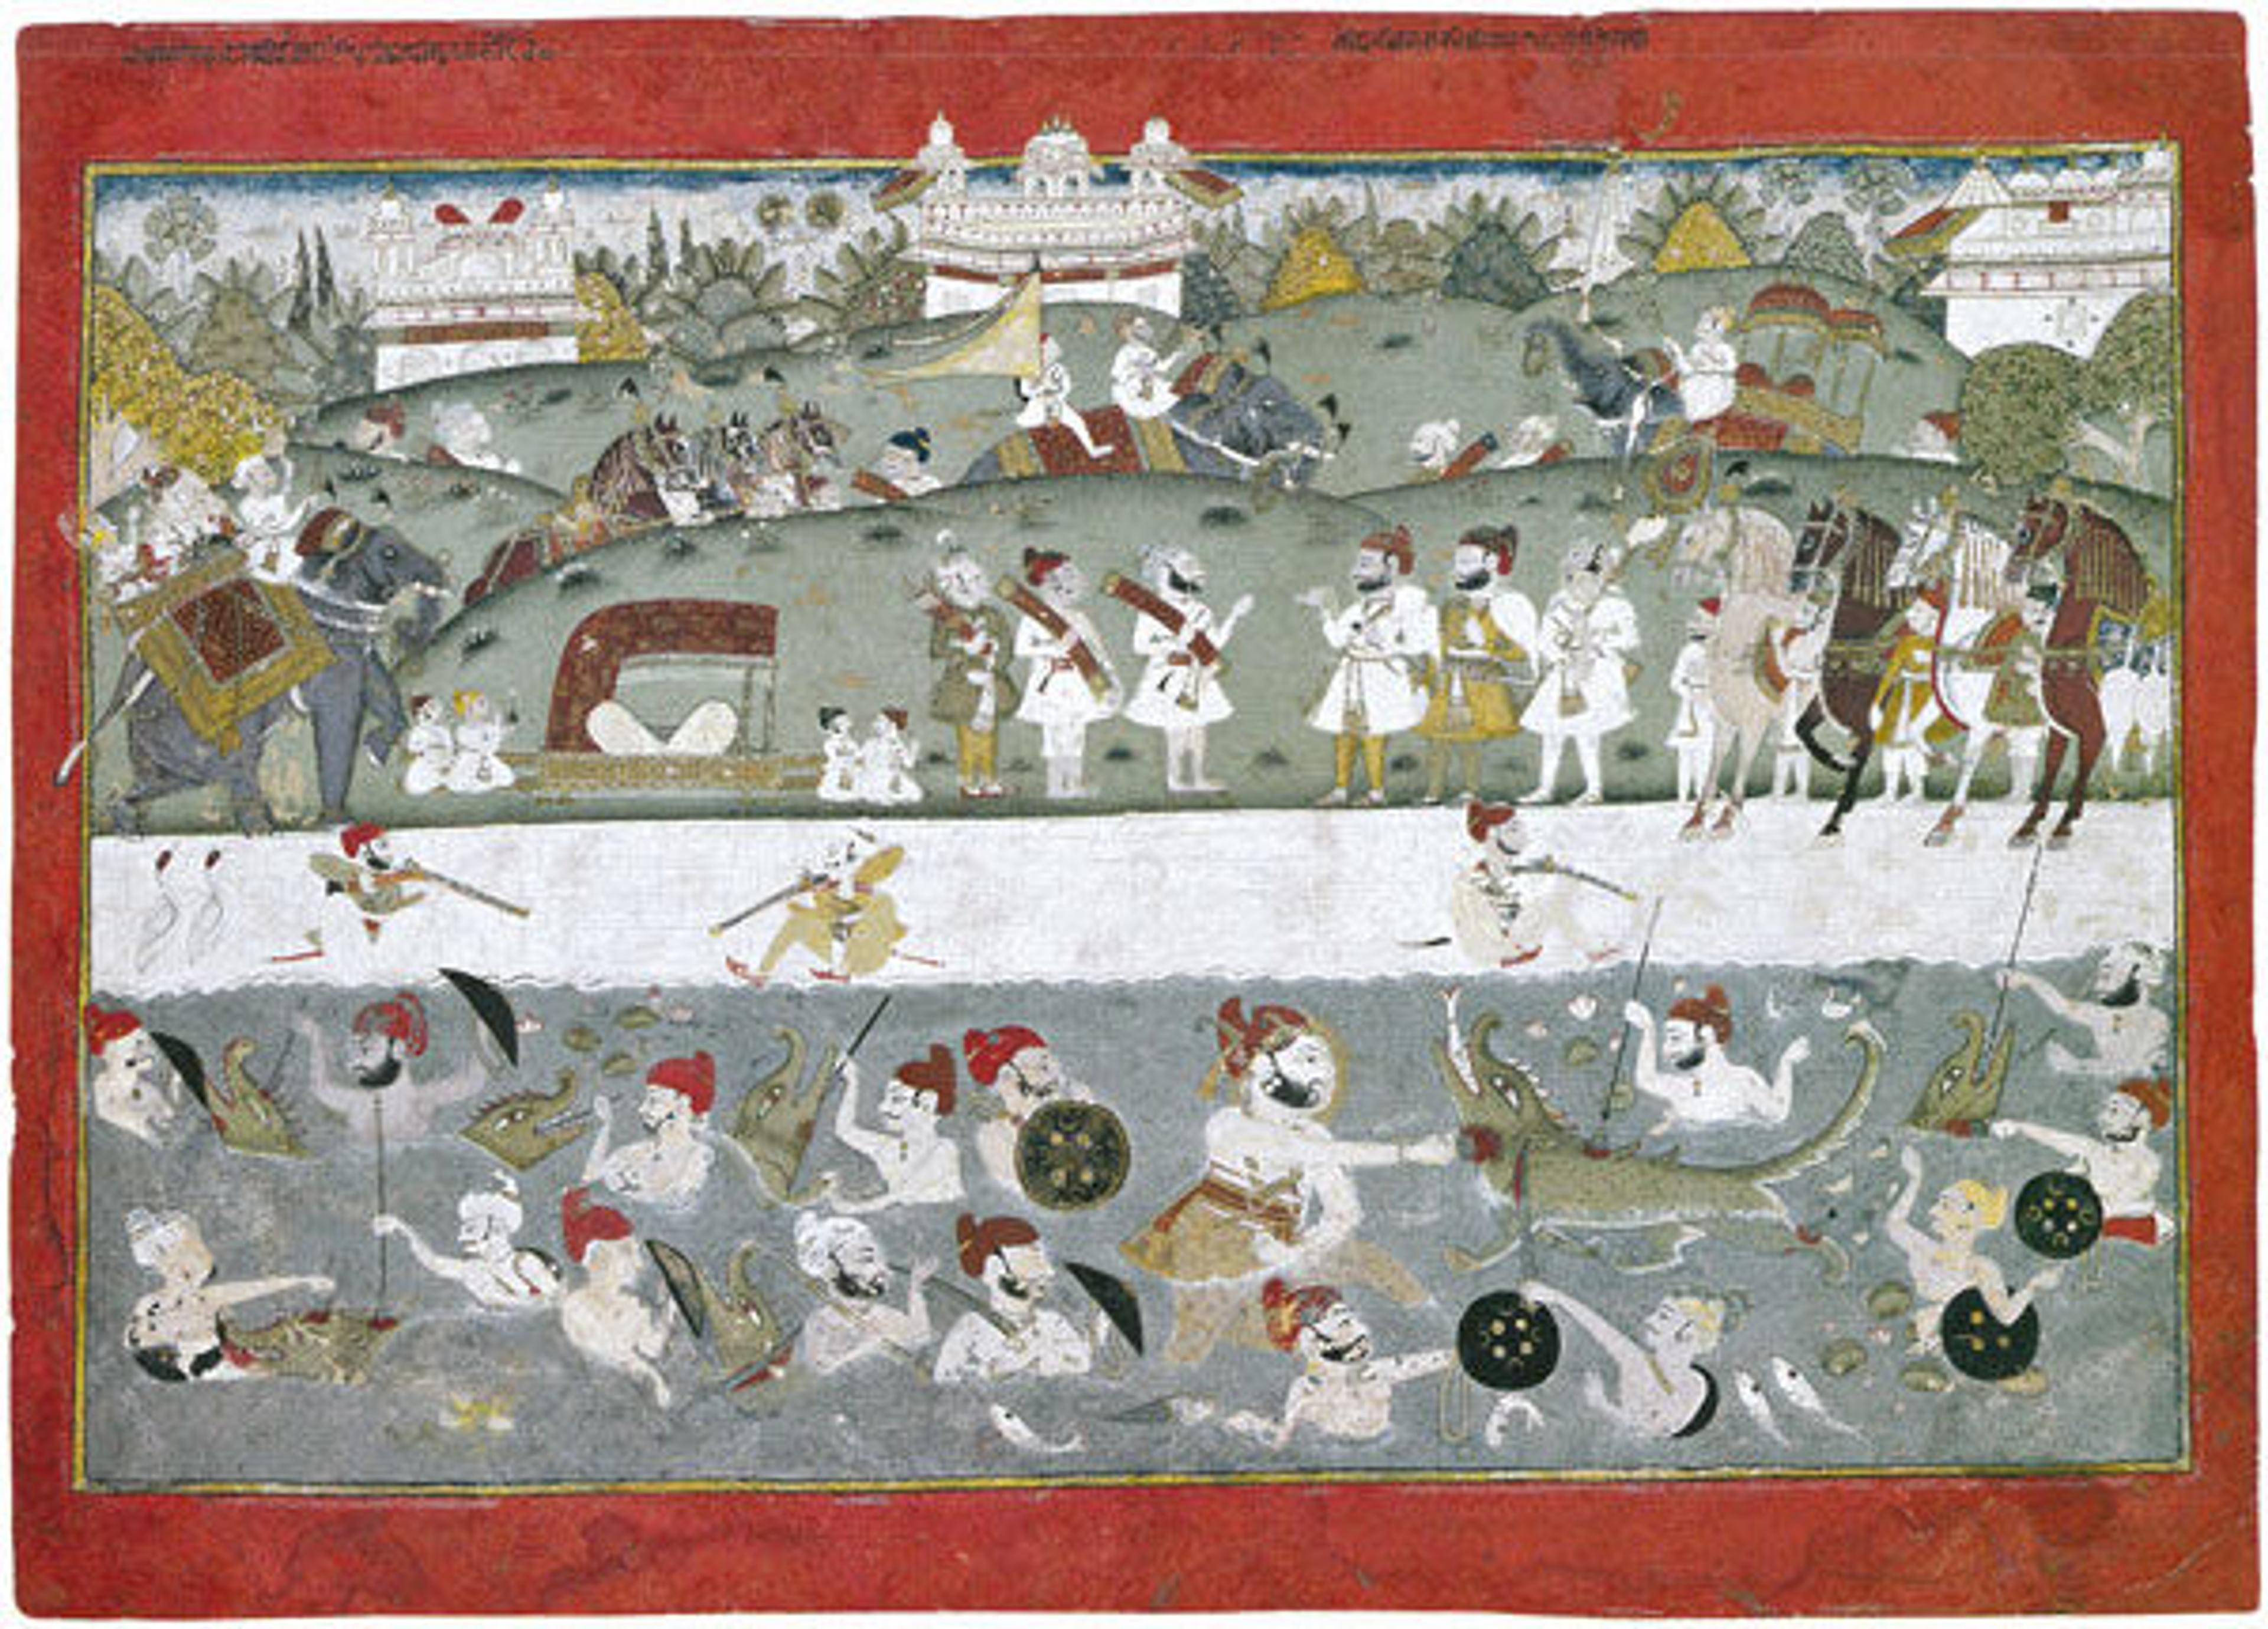 Maharaja Kumar Isri Singh's Crocodile Hunt, ca. 1760. Western India, Rajasthan, Jaipur or Unaira. Opaque watercolor and gold on paper; 16 15/16 x 23 5/8 in. (43 x 60 cm). Lent by Maximilian James Polsky